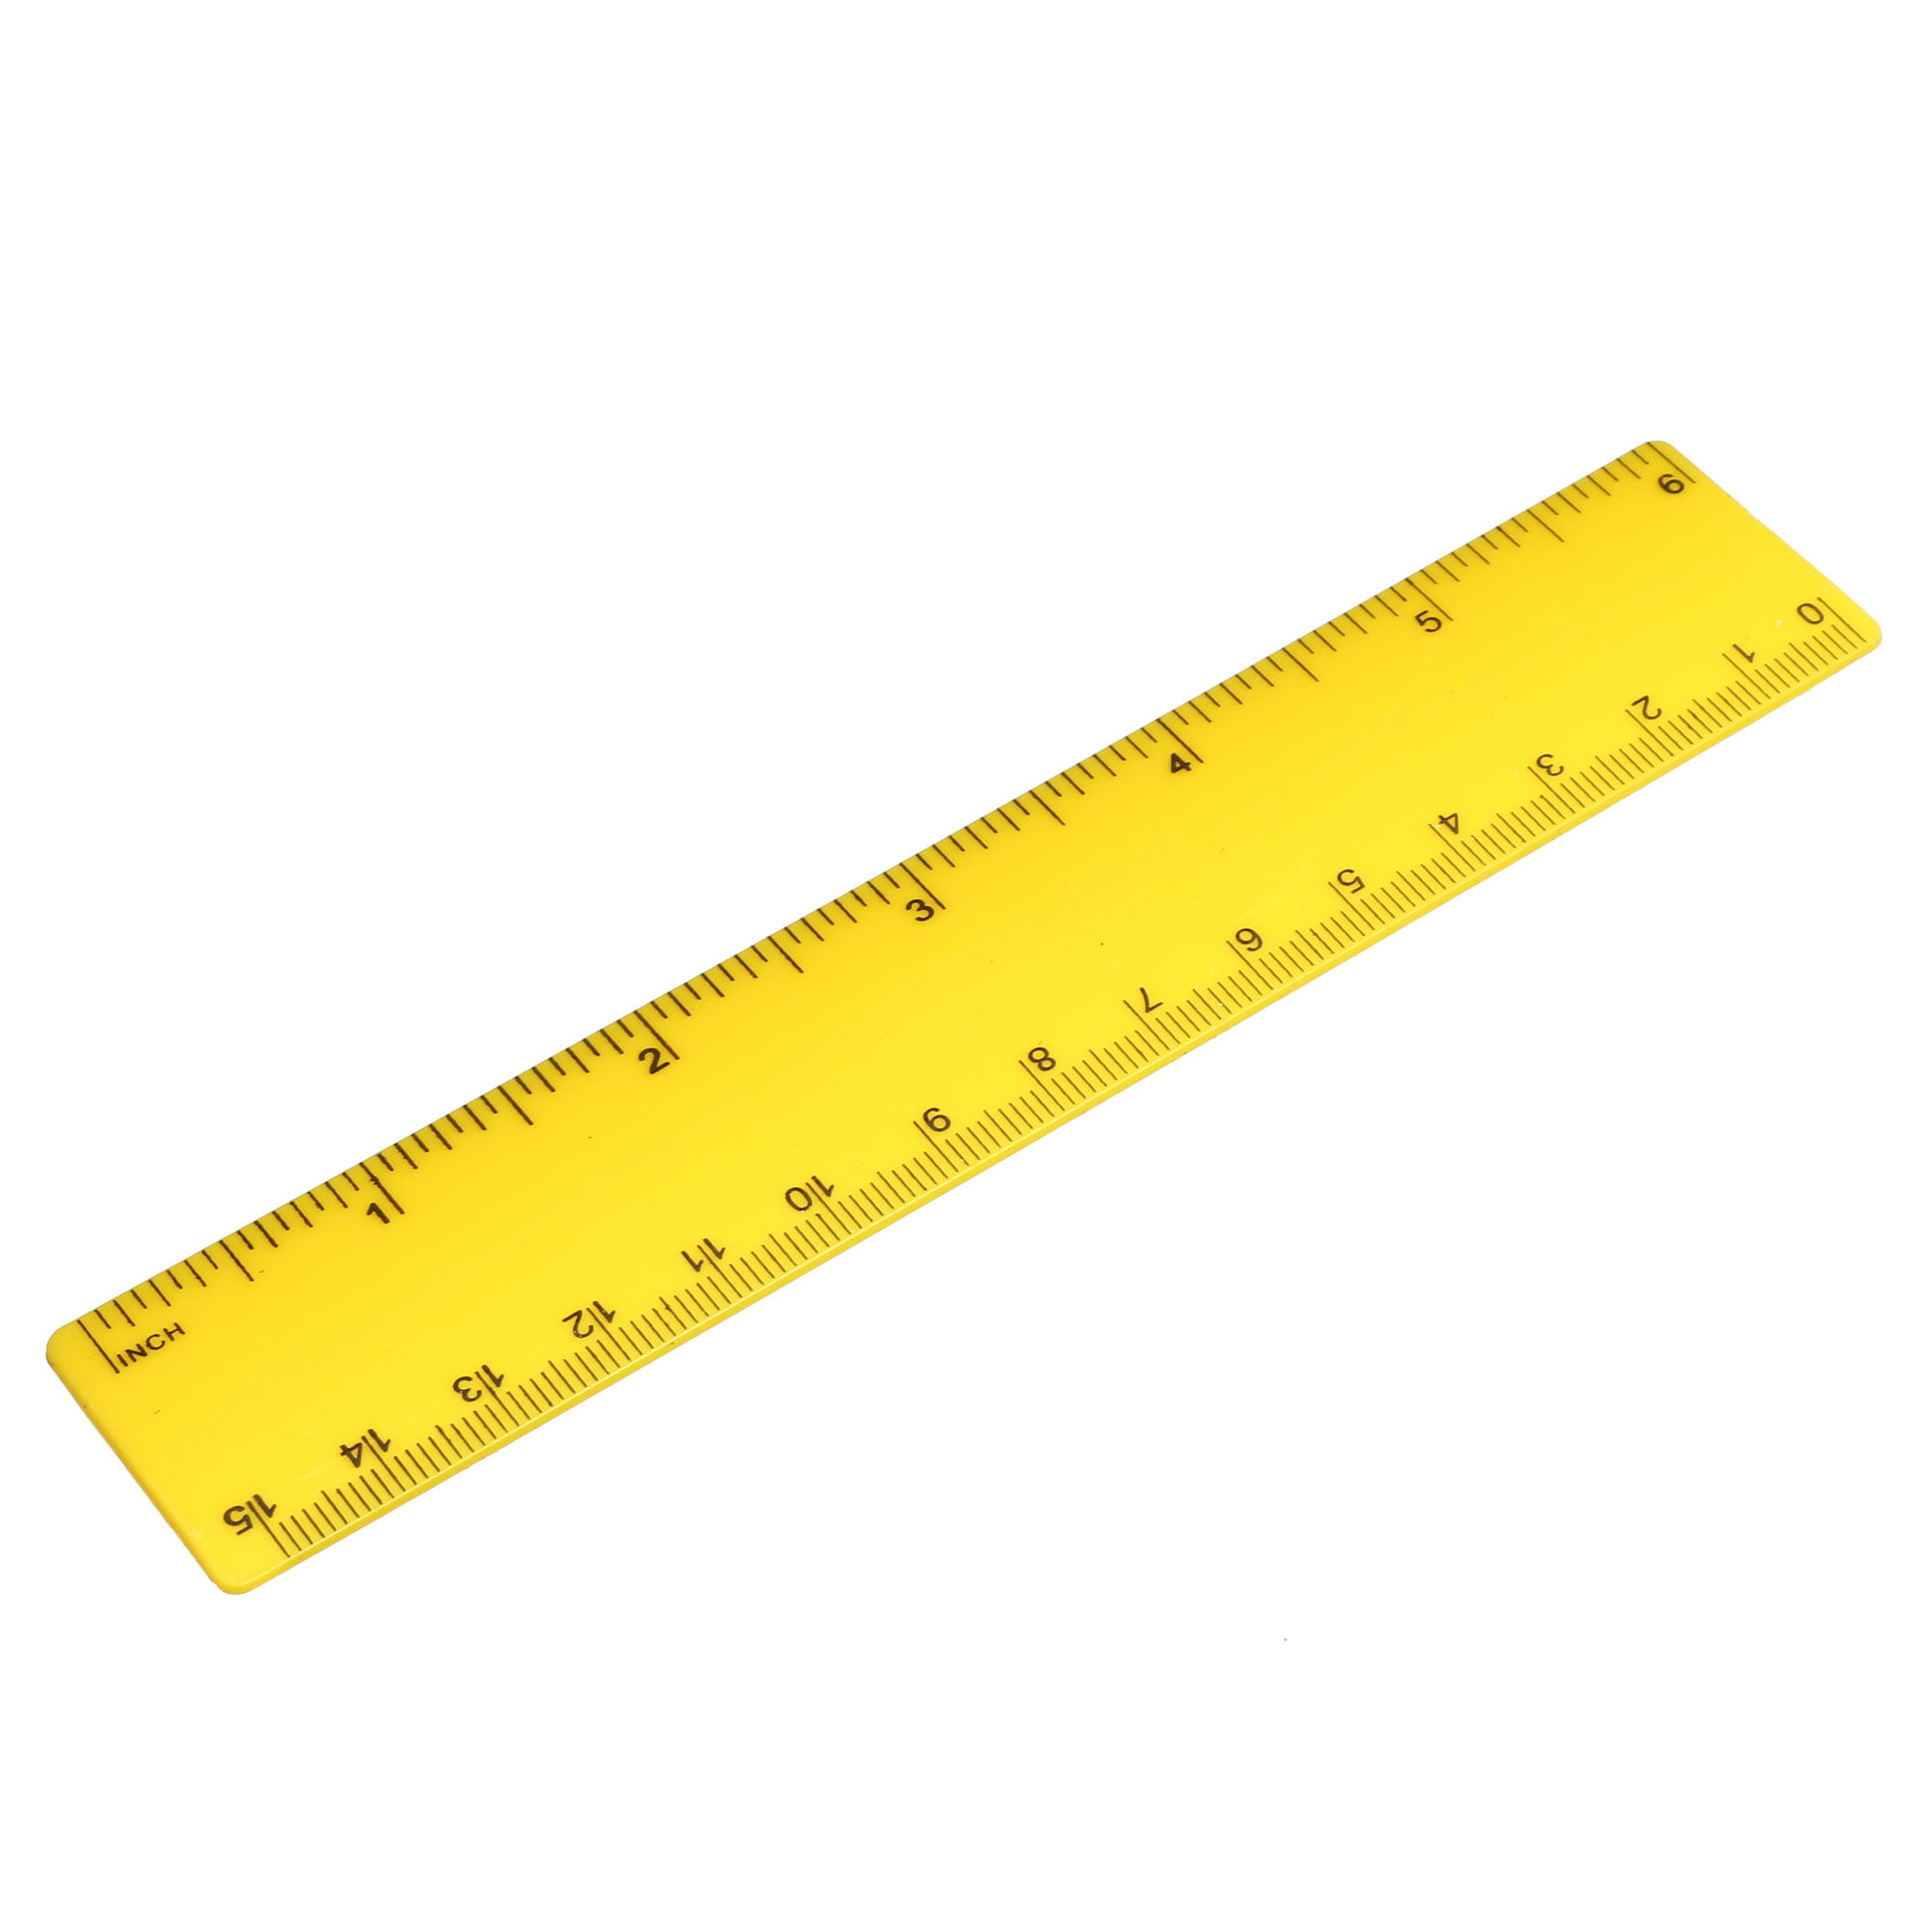 plastic-ruler-15cm-6-inches-straight-ruler-yellow-measuring-tool-for